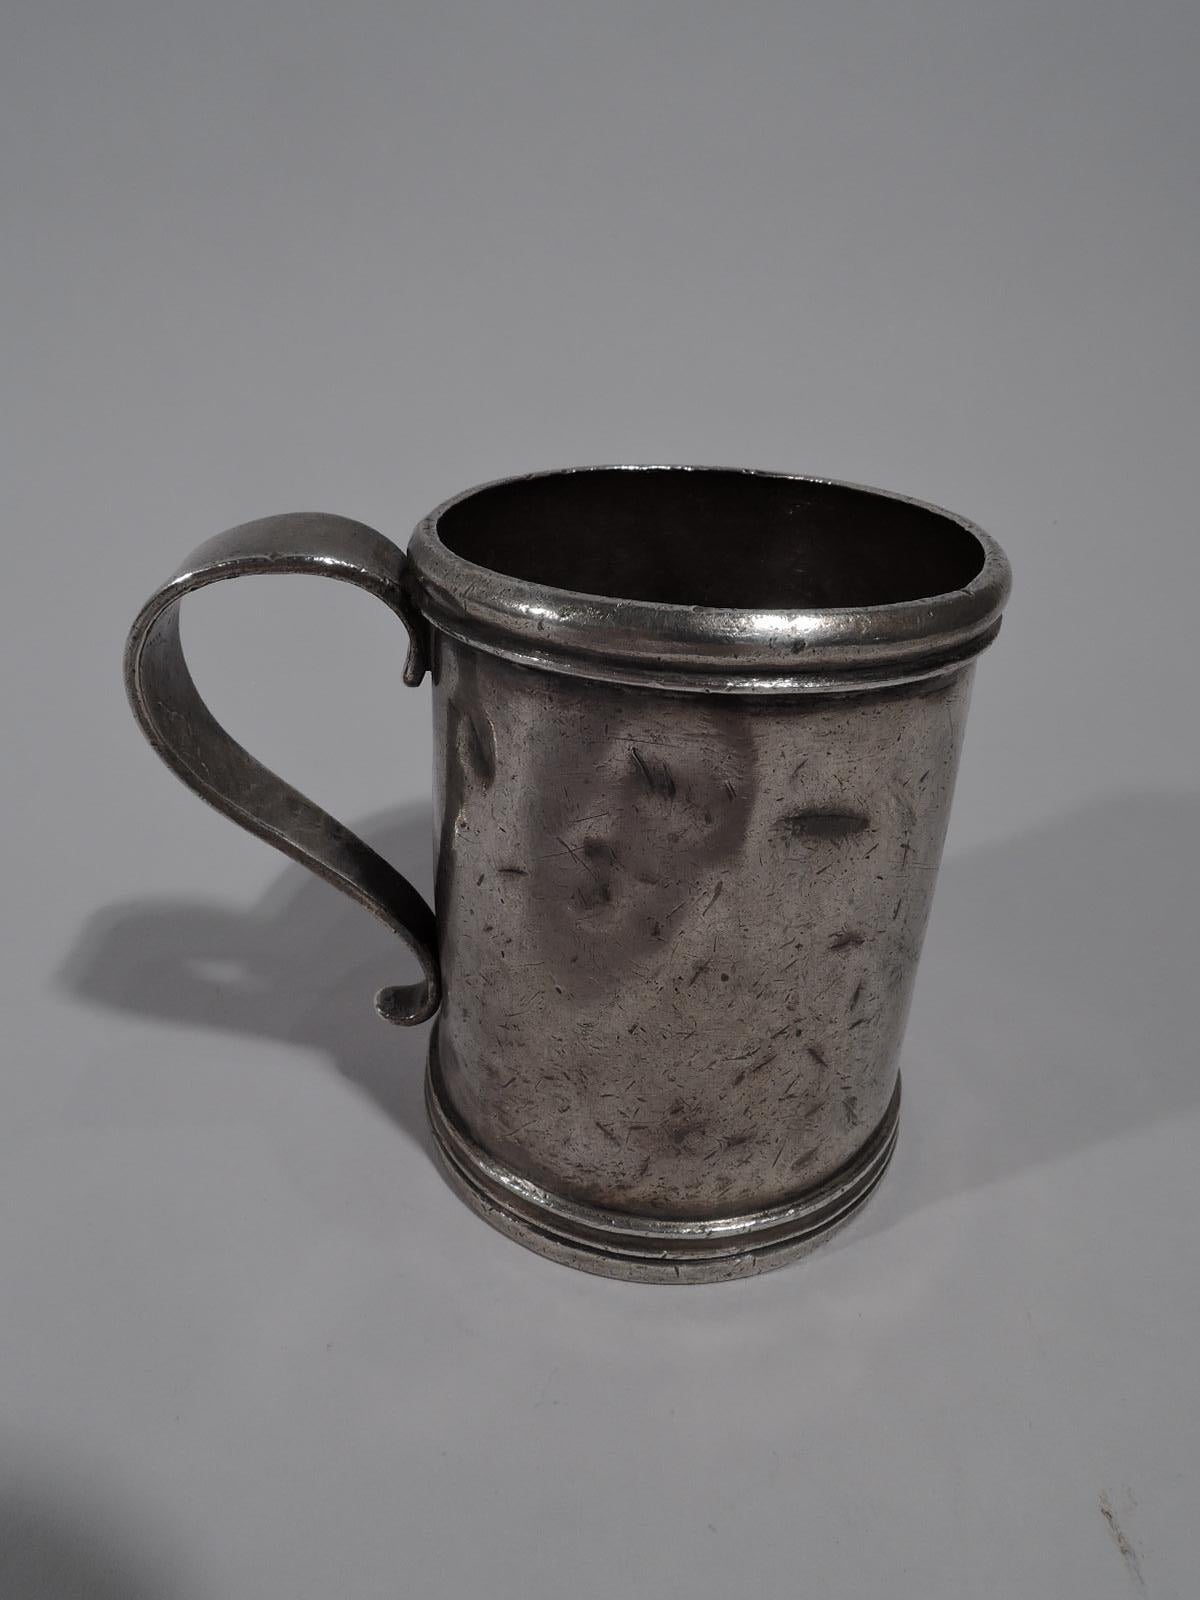 South American silver mug, early 19 century Straight sides with s-scroll handle and molded rim and base. Script initials engraved on underside. Heavy weight: 8 troy ounces.